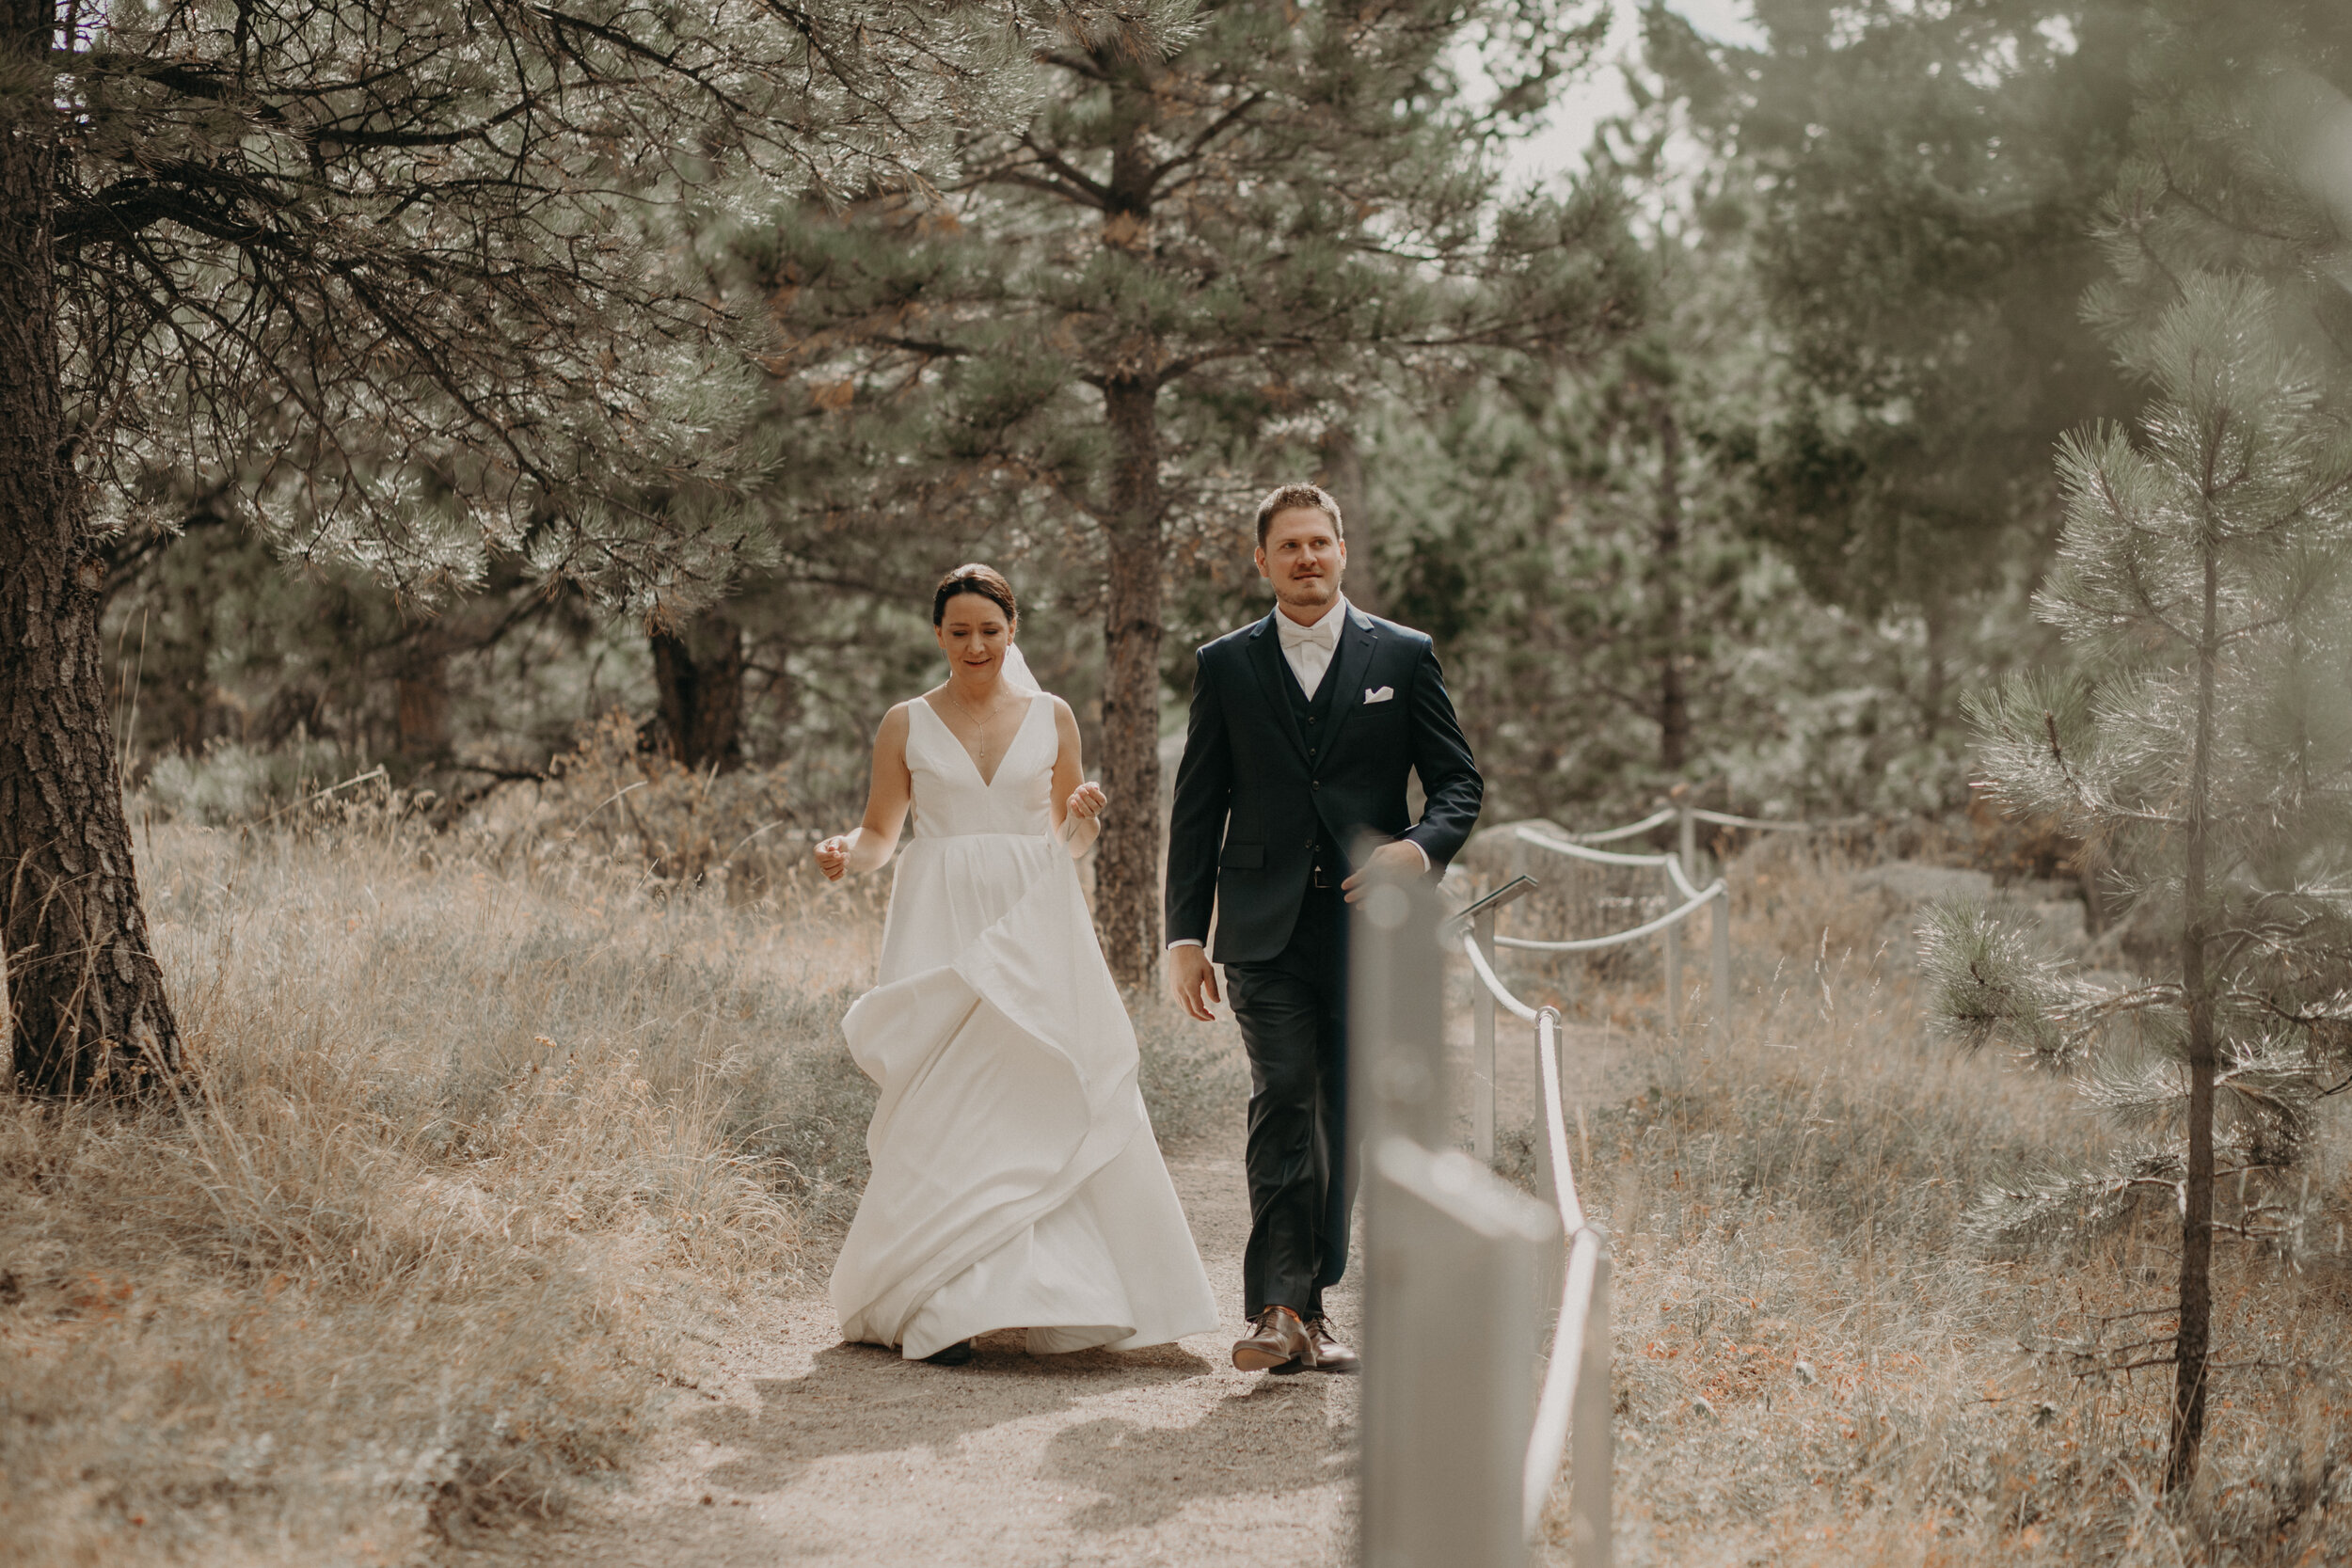  Andrea Wagner Photography captures an elopement on Flagstaff Mountain 